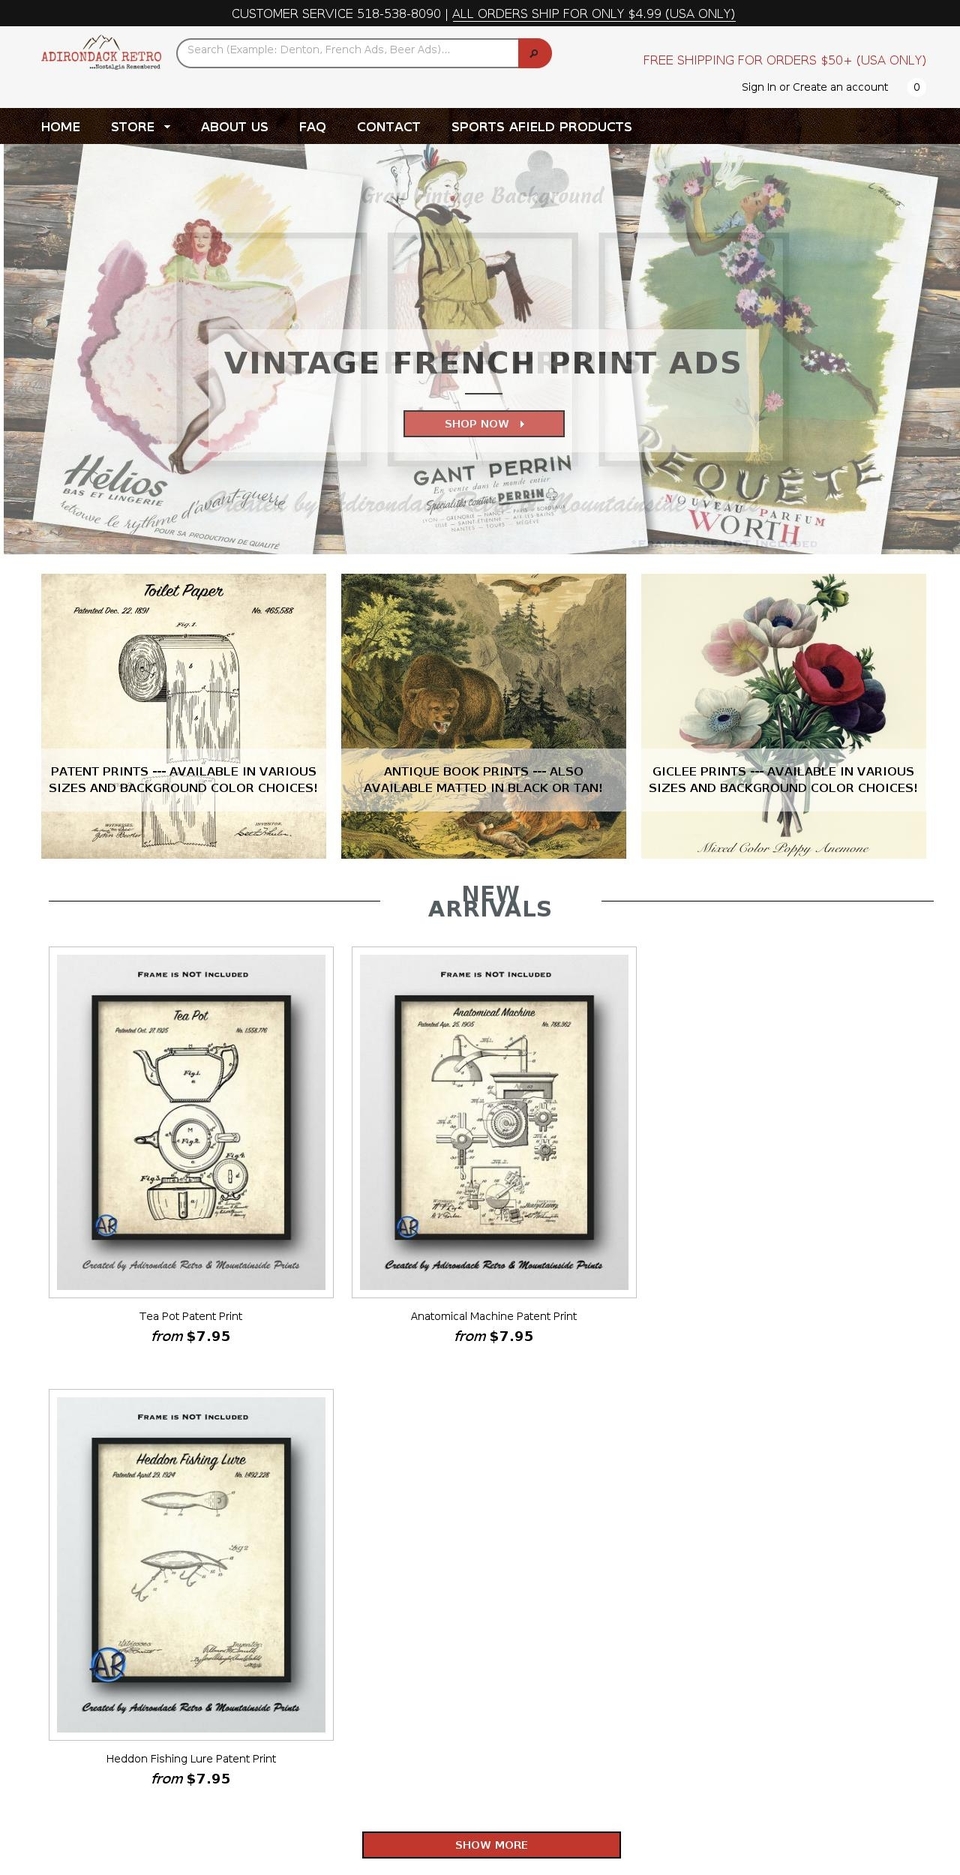 Made With ❤ By Minion Made Shopify theme site example adirondackretro.com